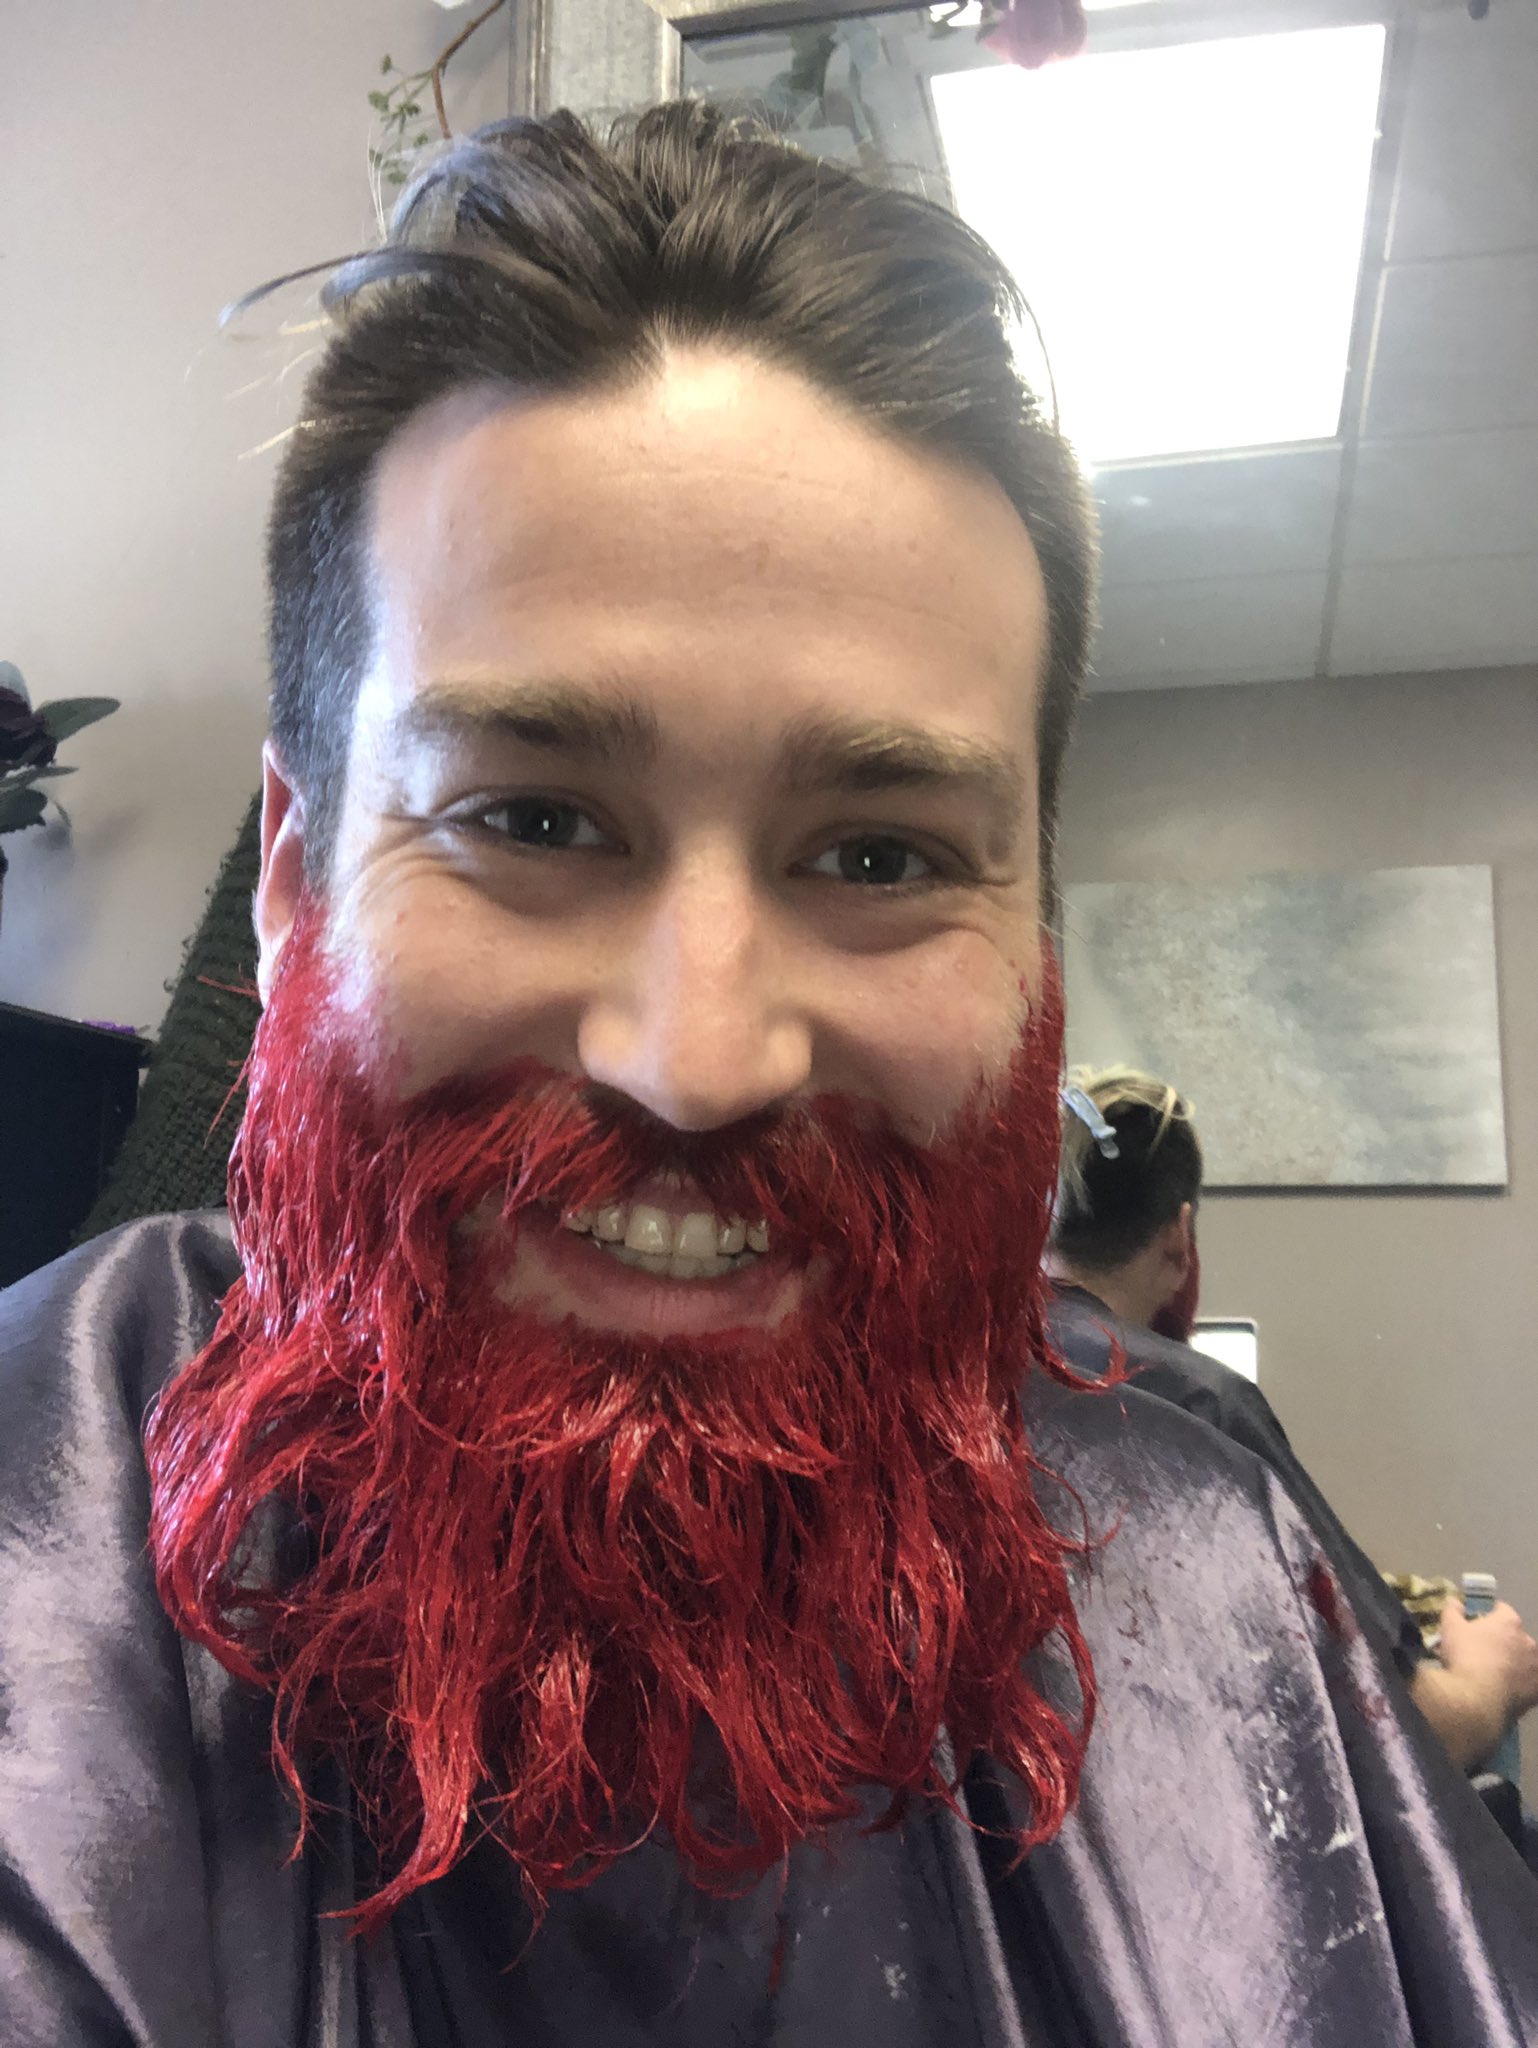 on Twitter: "Coloring the beard red. #beards /